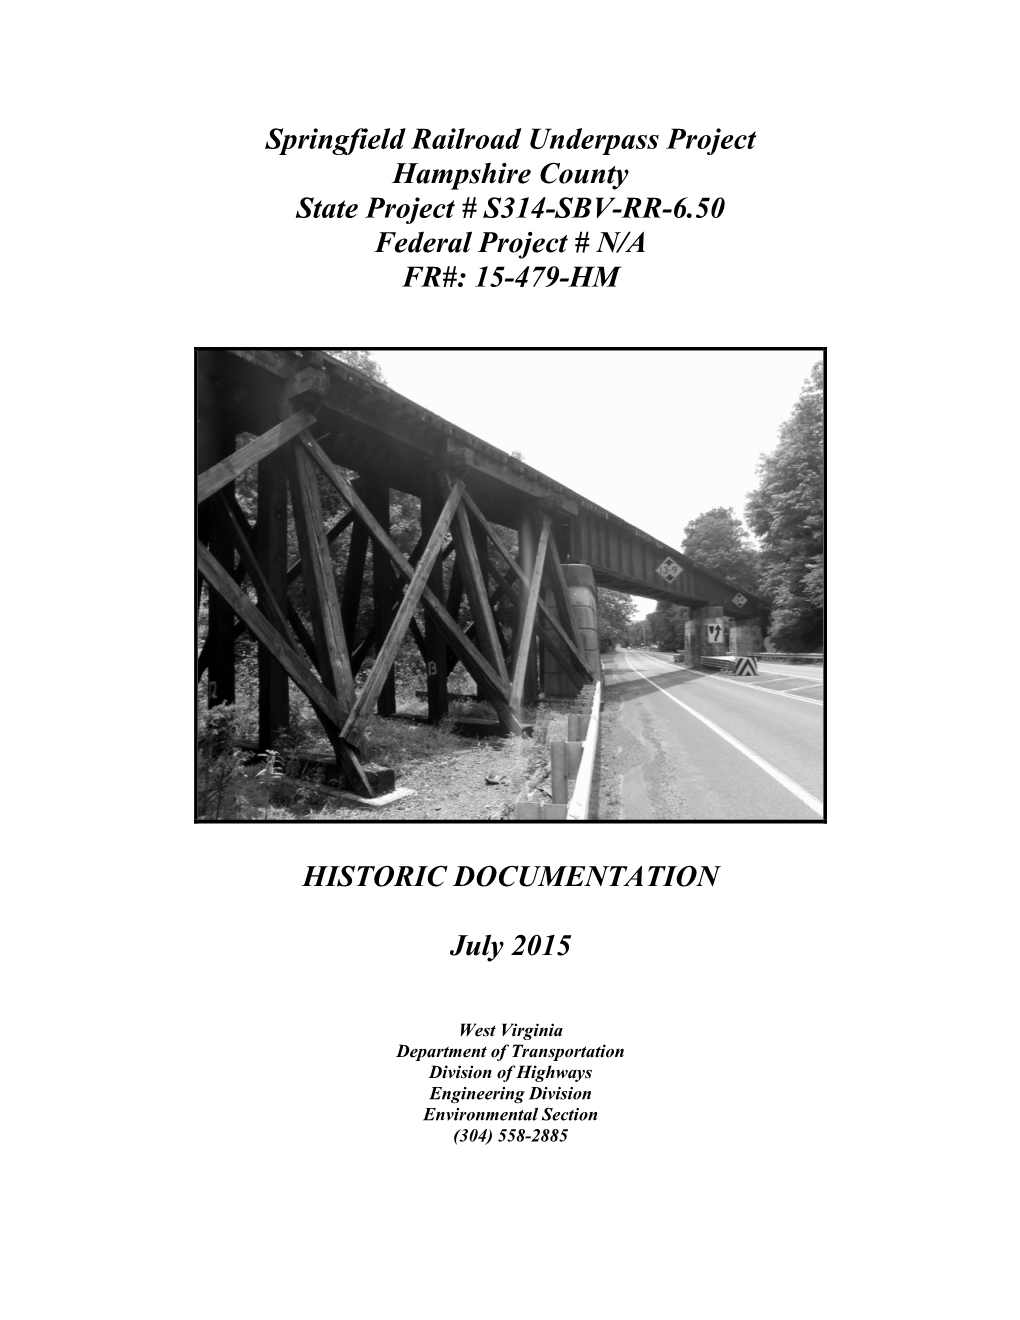 Springfield Railroad Underpass Project Hampshire County State Project # S314-SBV-RR-6.50 Federal Project # N/A FR#: 15-479-HM